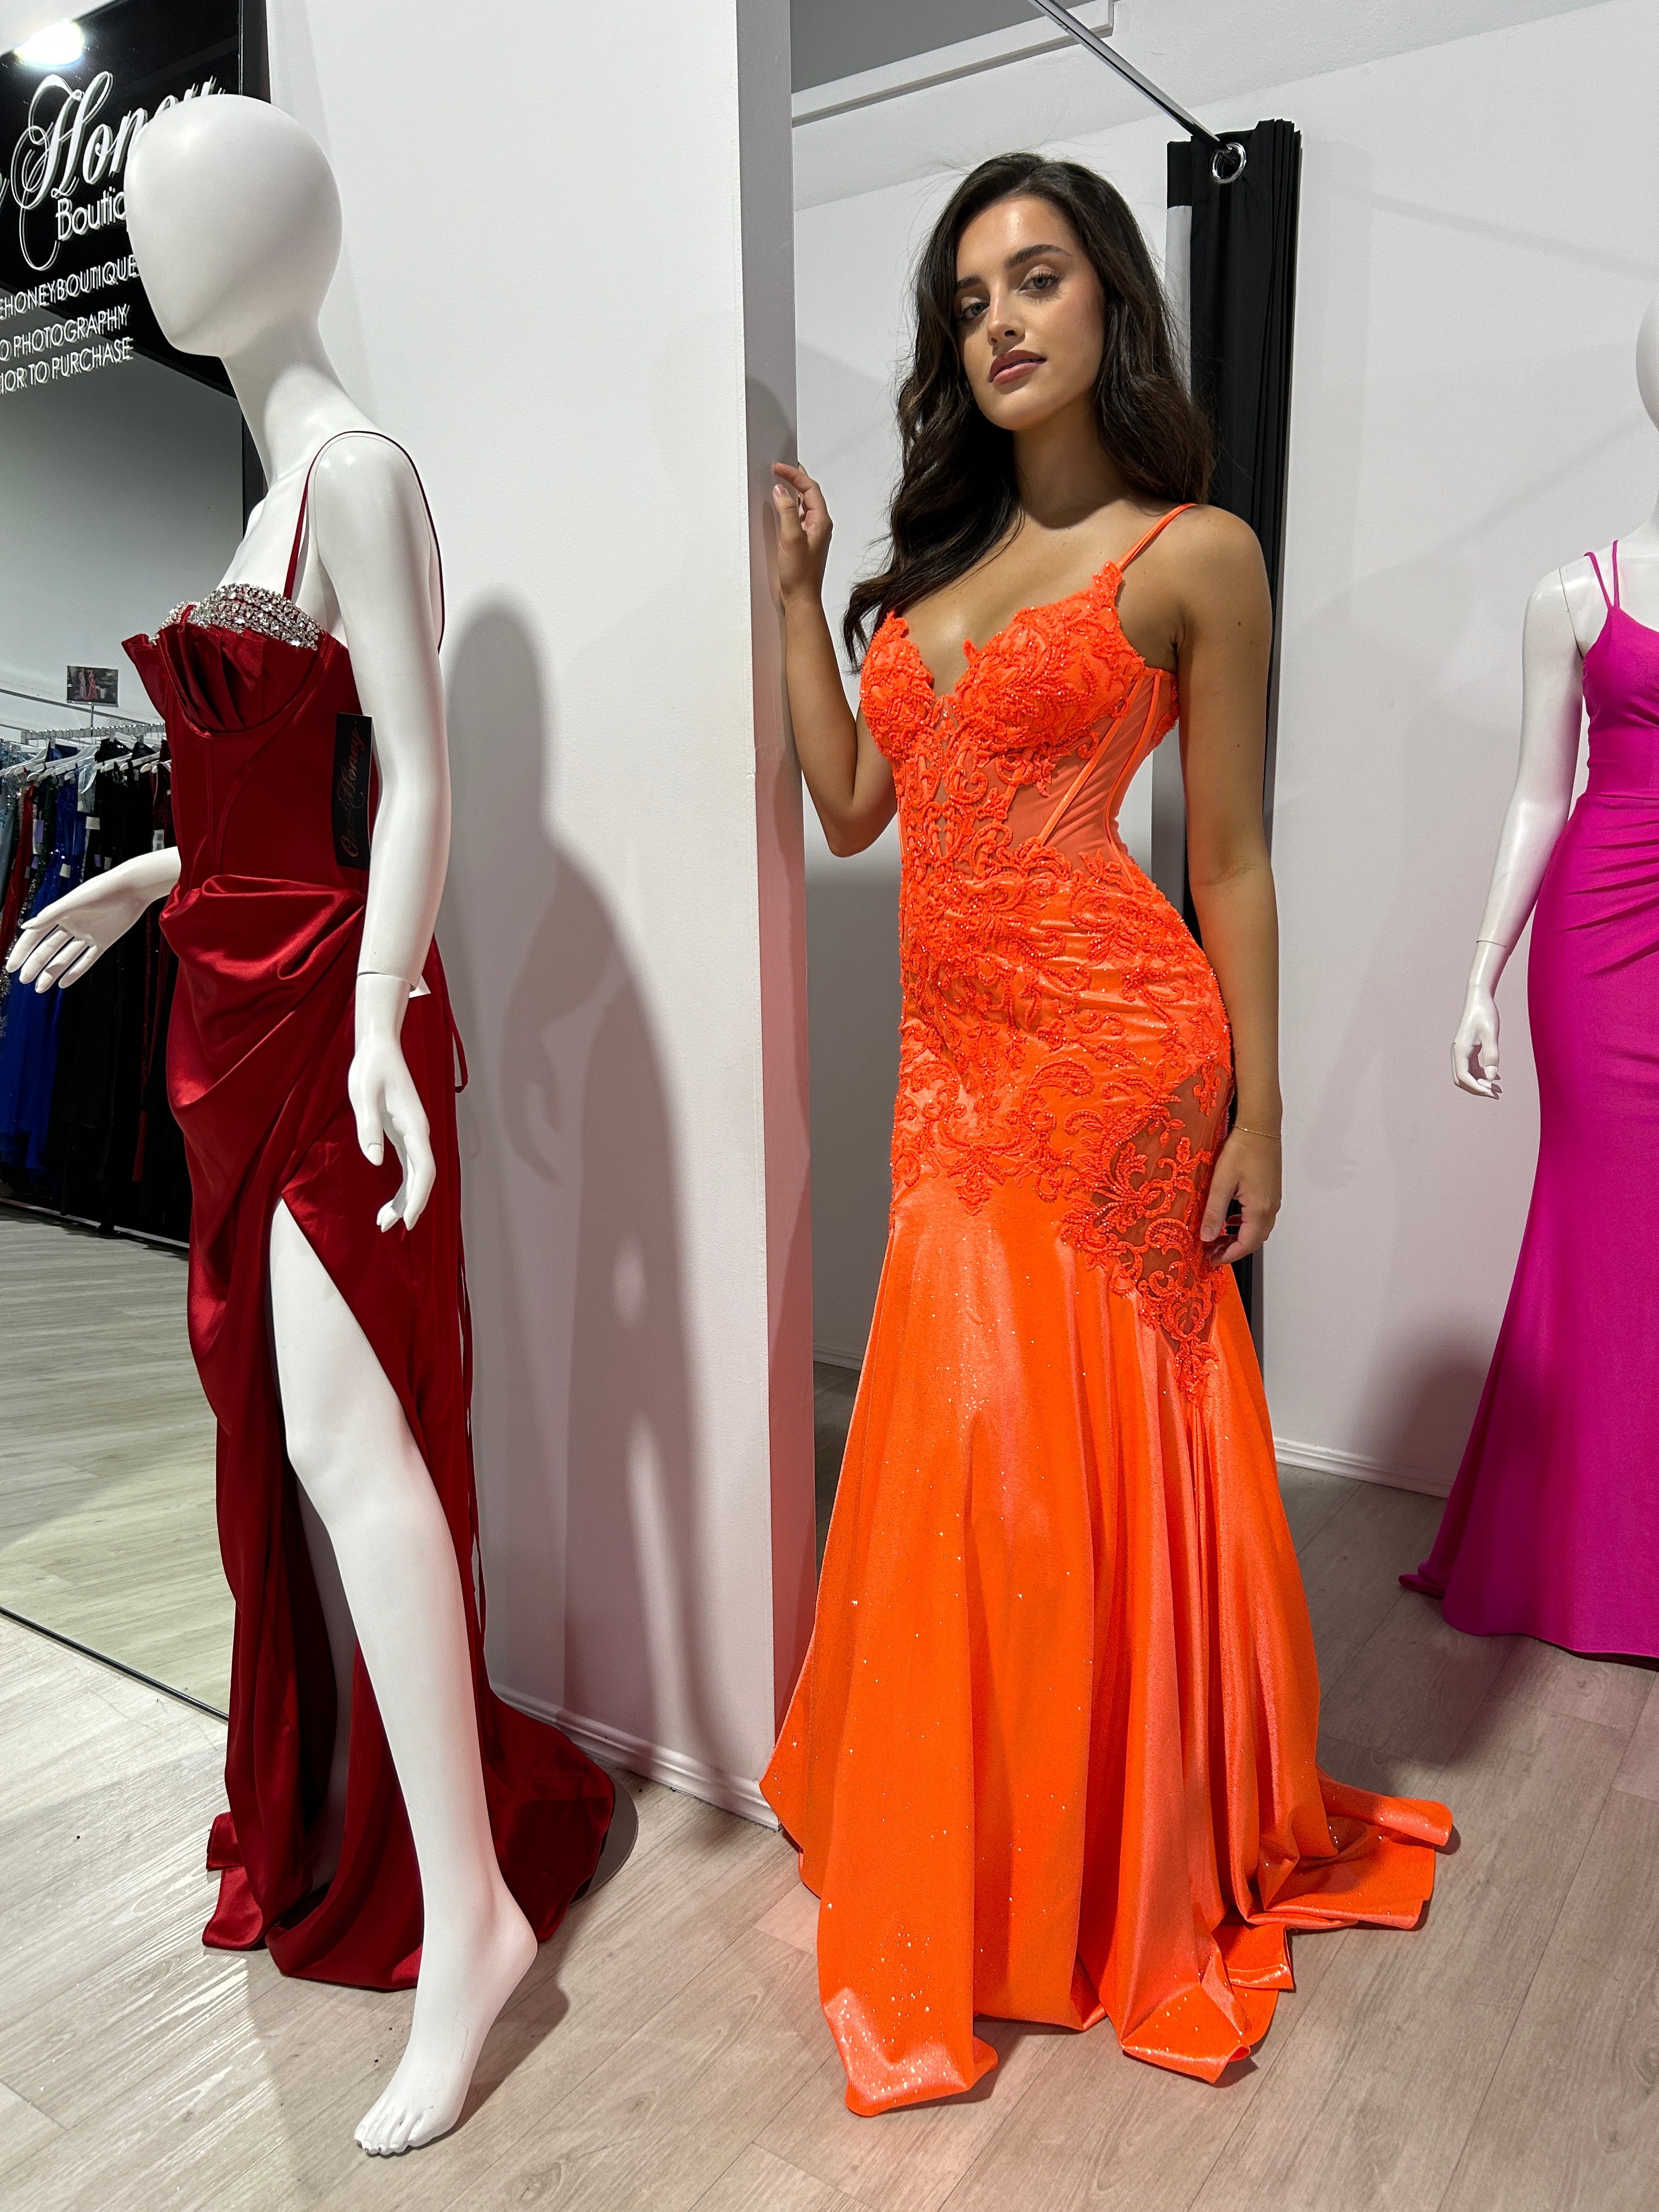 Honey Couture JEAN Neon Orange Lace and Glitter Fishtail Mermaid Formal Dress